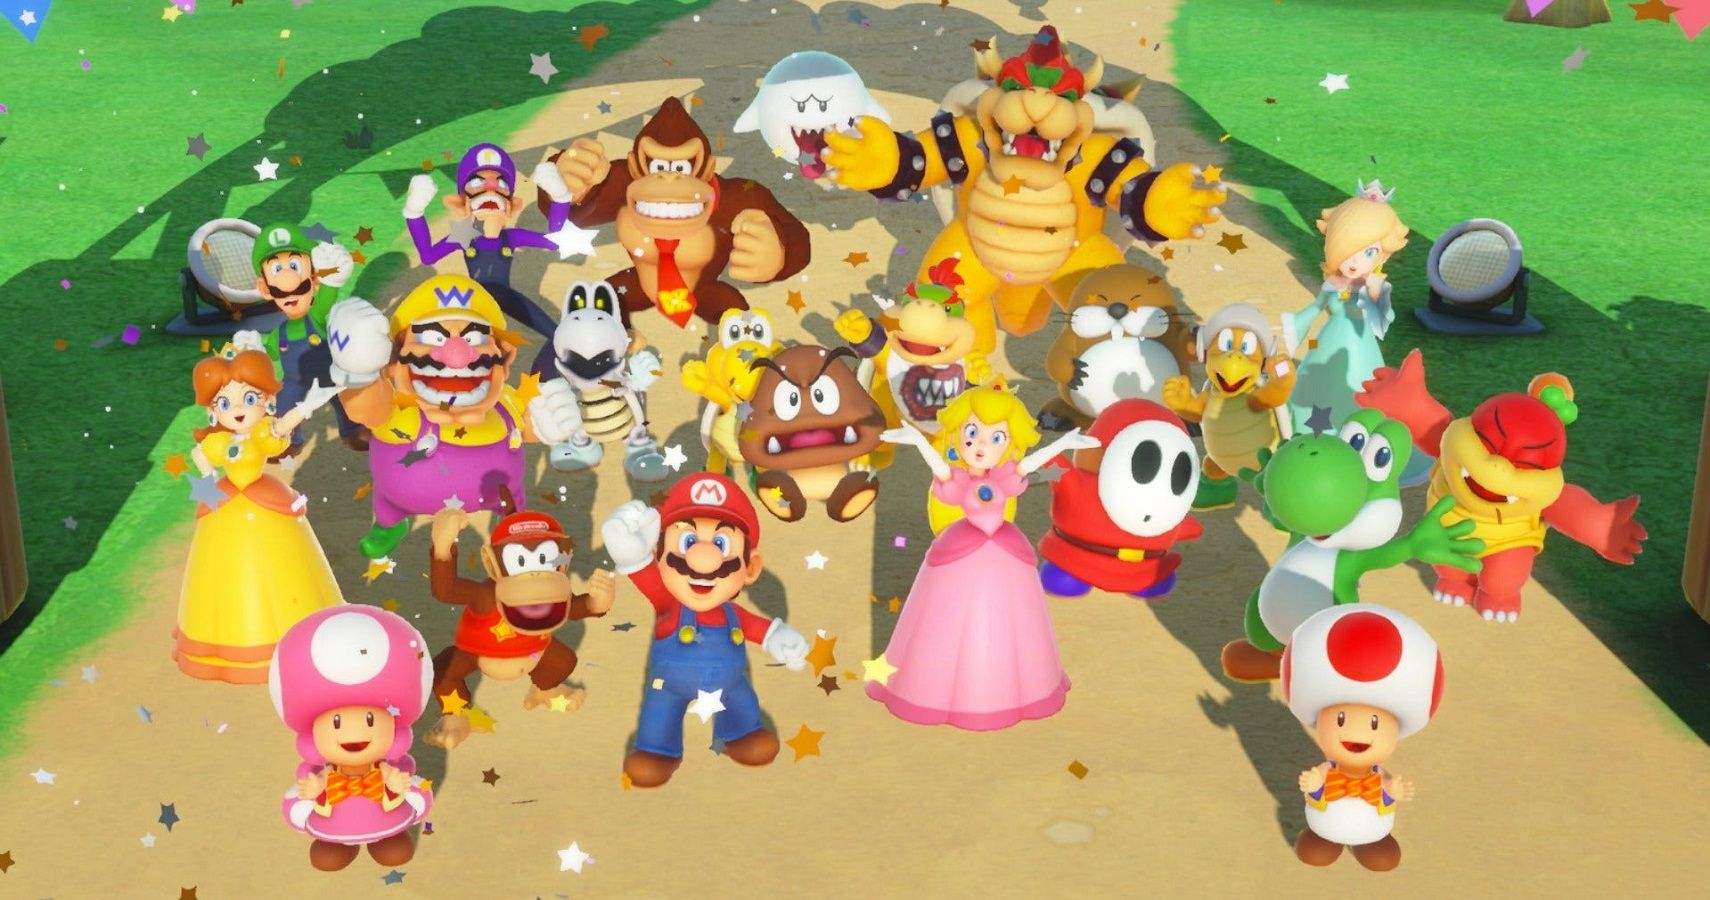 All of the Mario Party characters